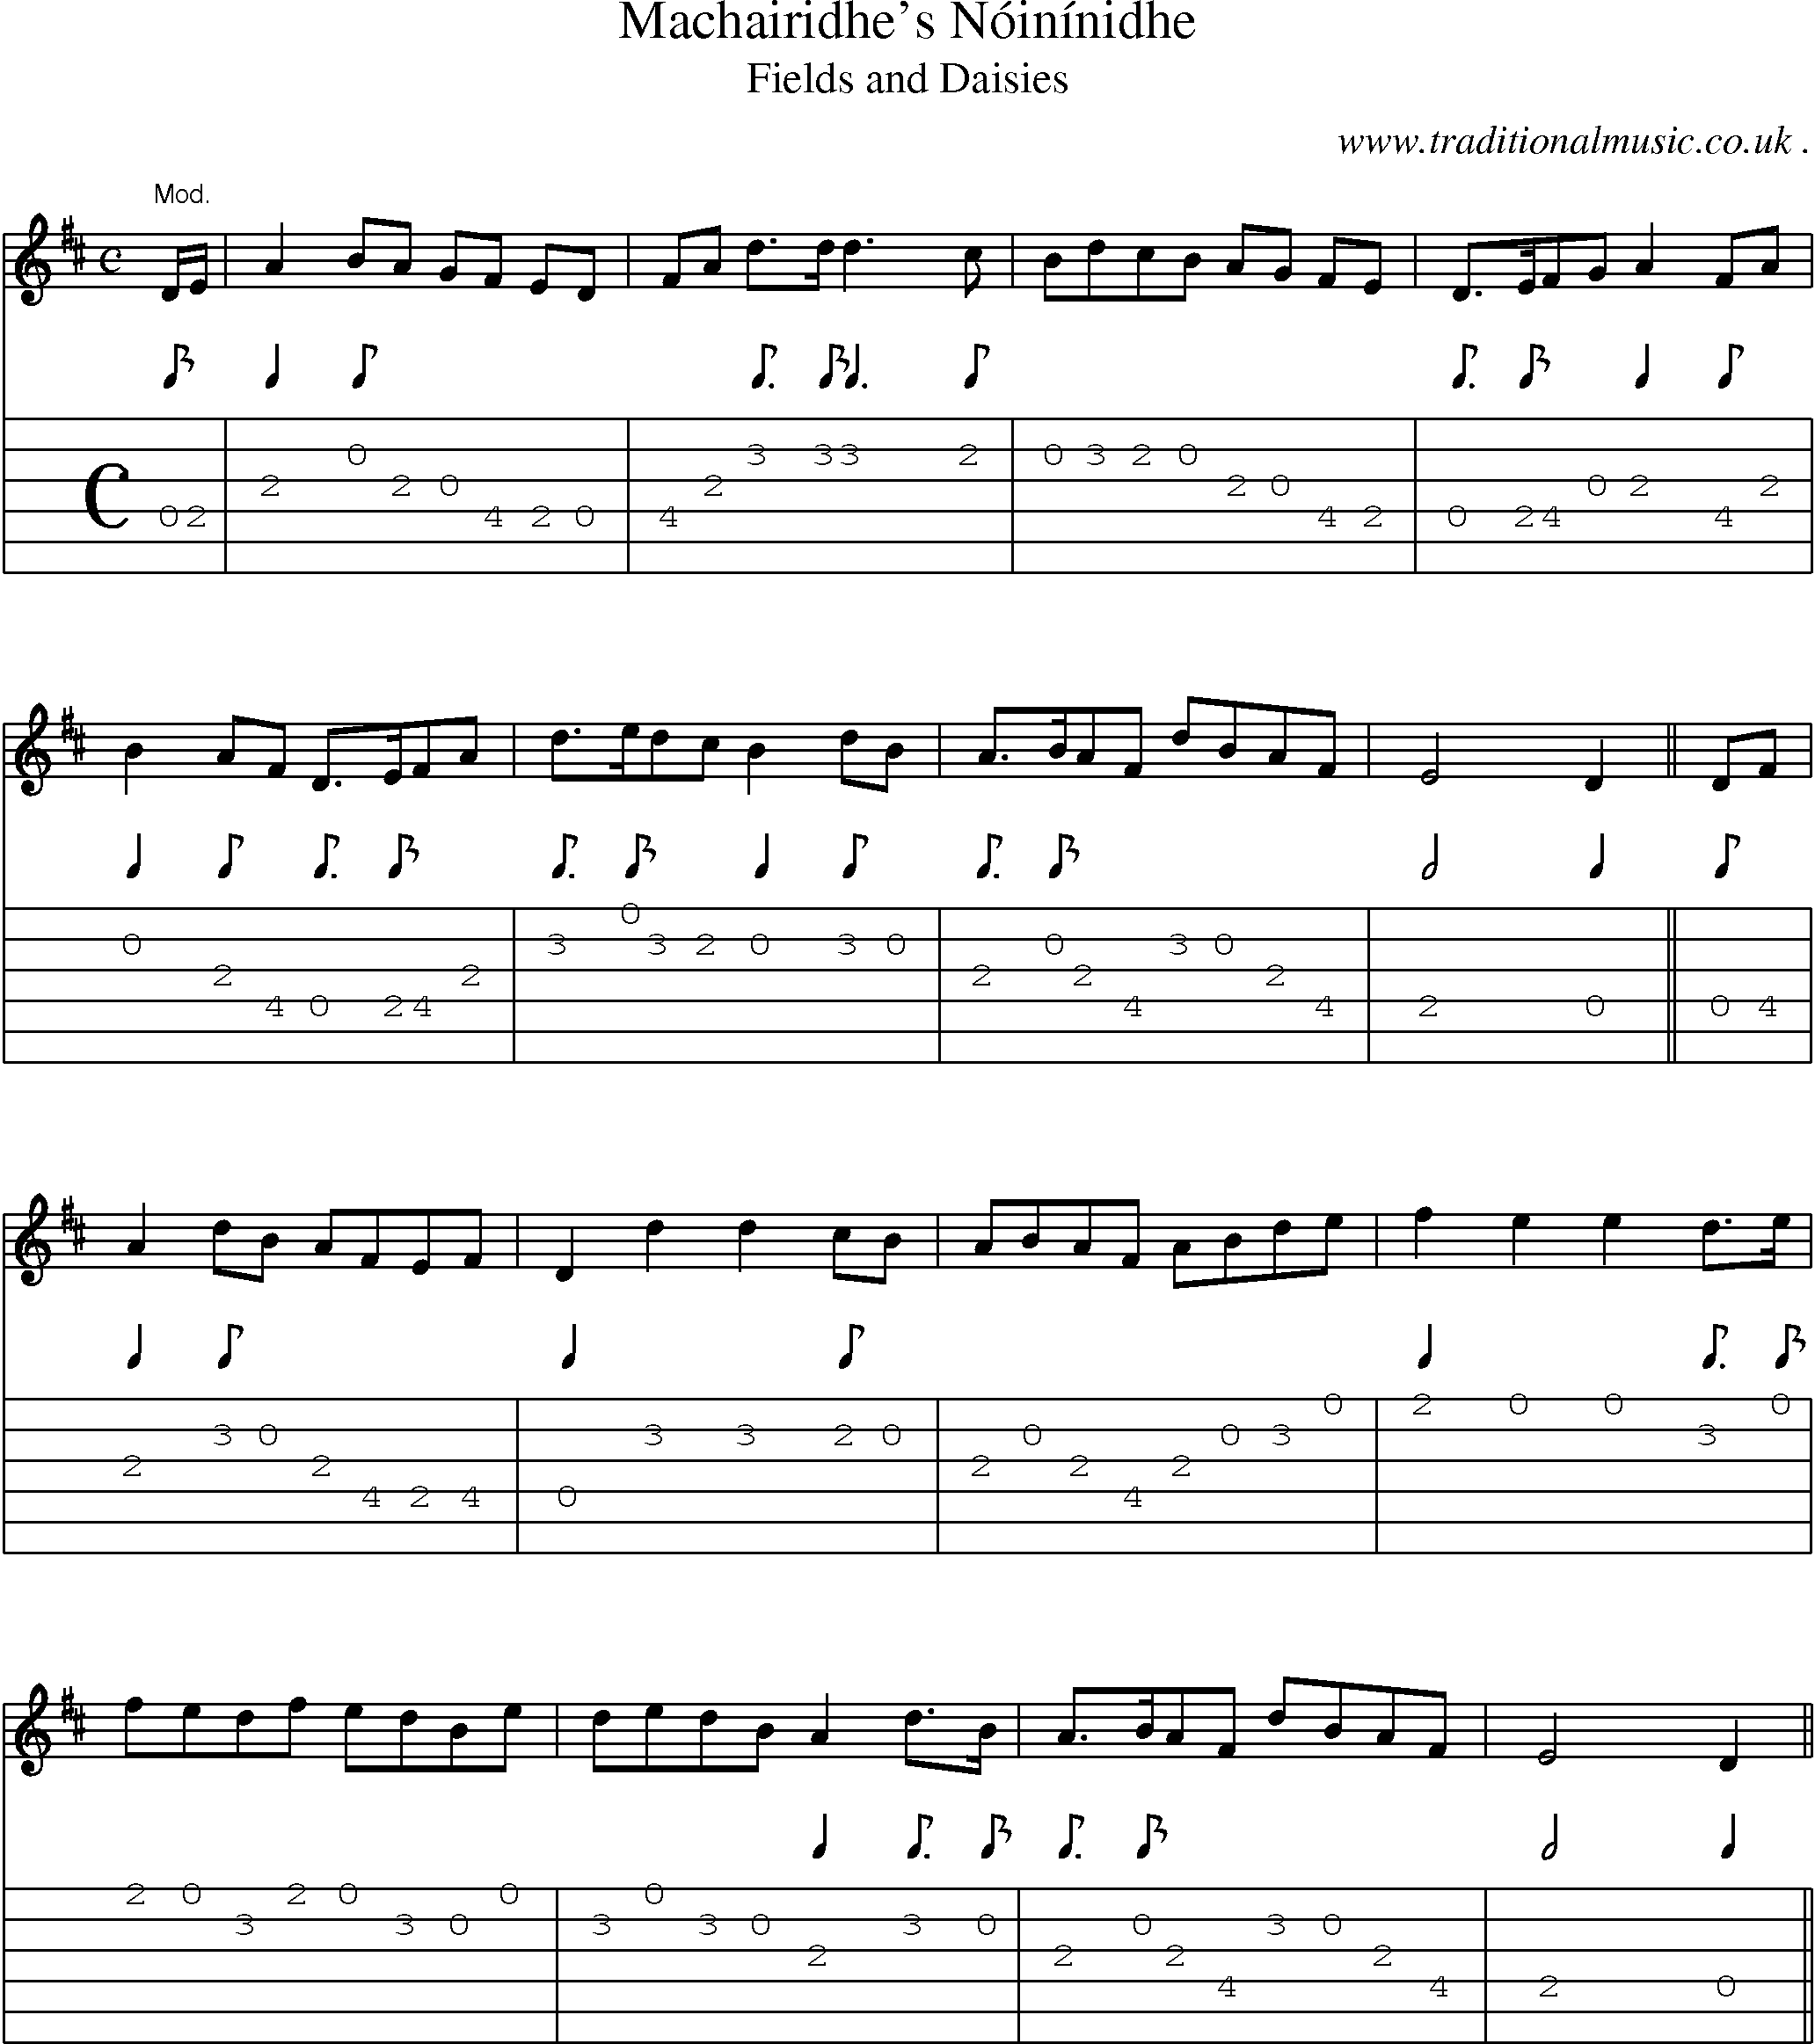 Sheet-Music and Guitar Tabs for Machairidhes Noininidhe